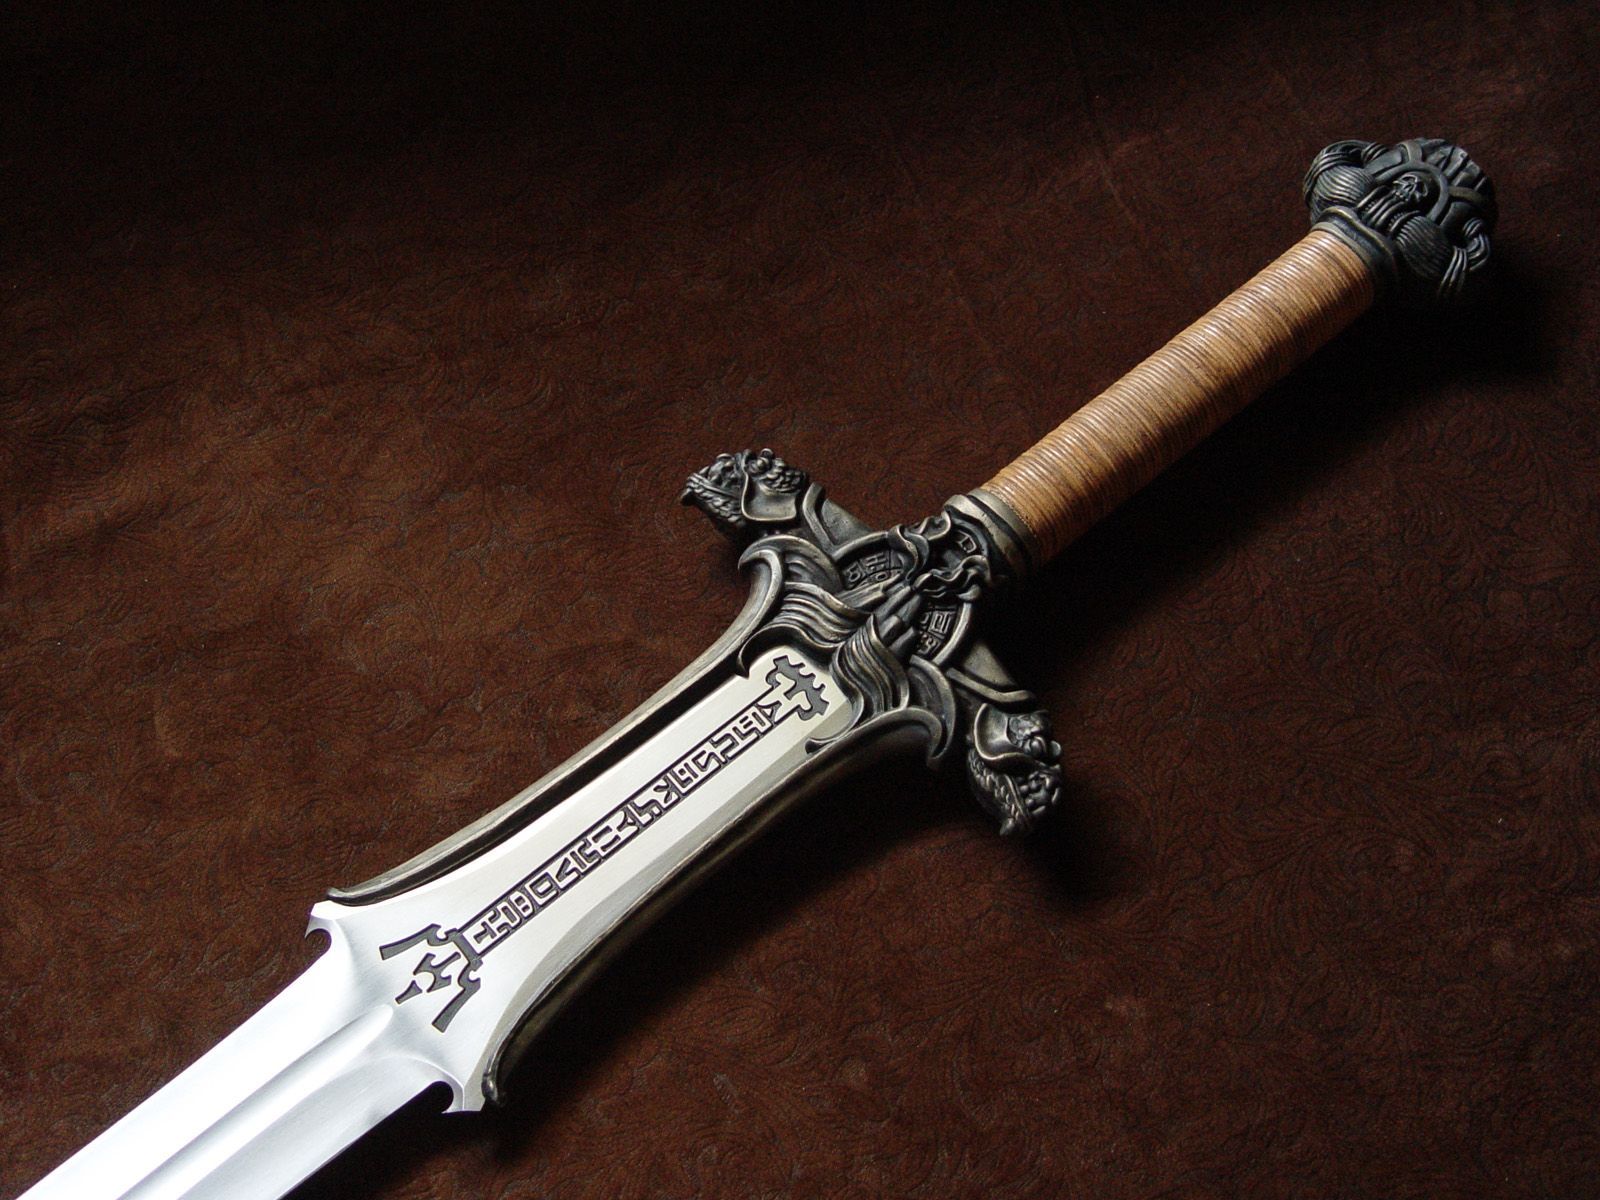 37 Sword HD Wallpapers Backgrounds - Wallpaper Abyss